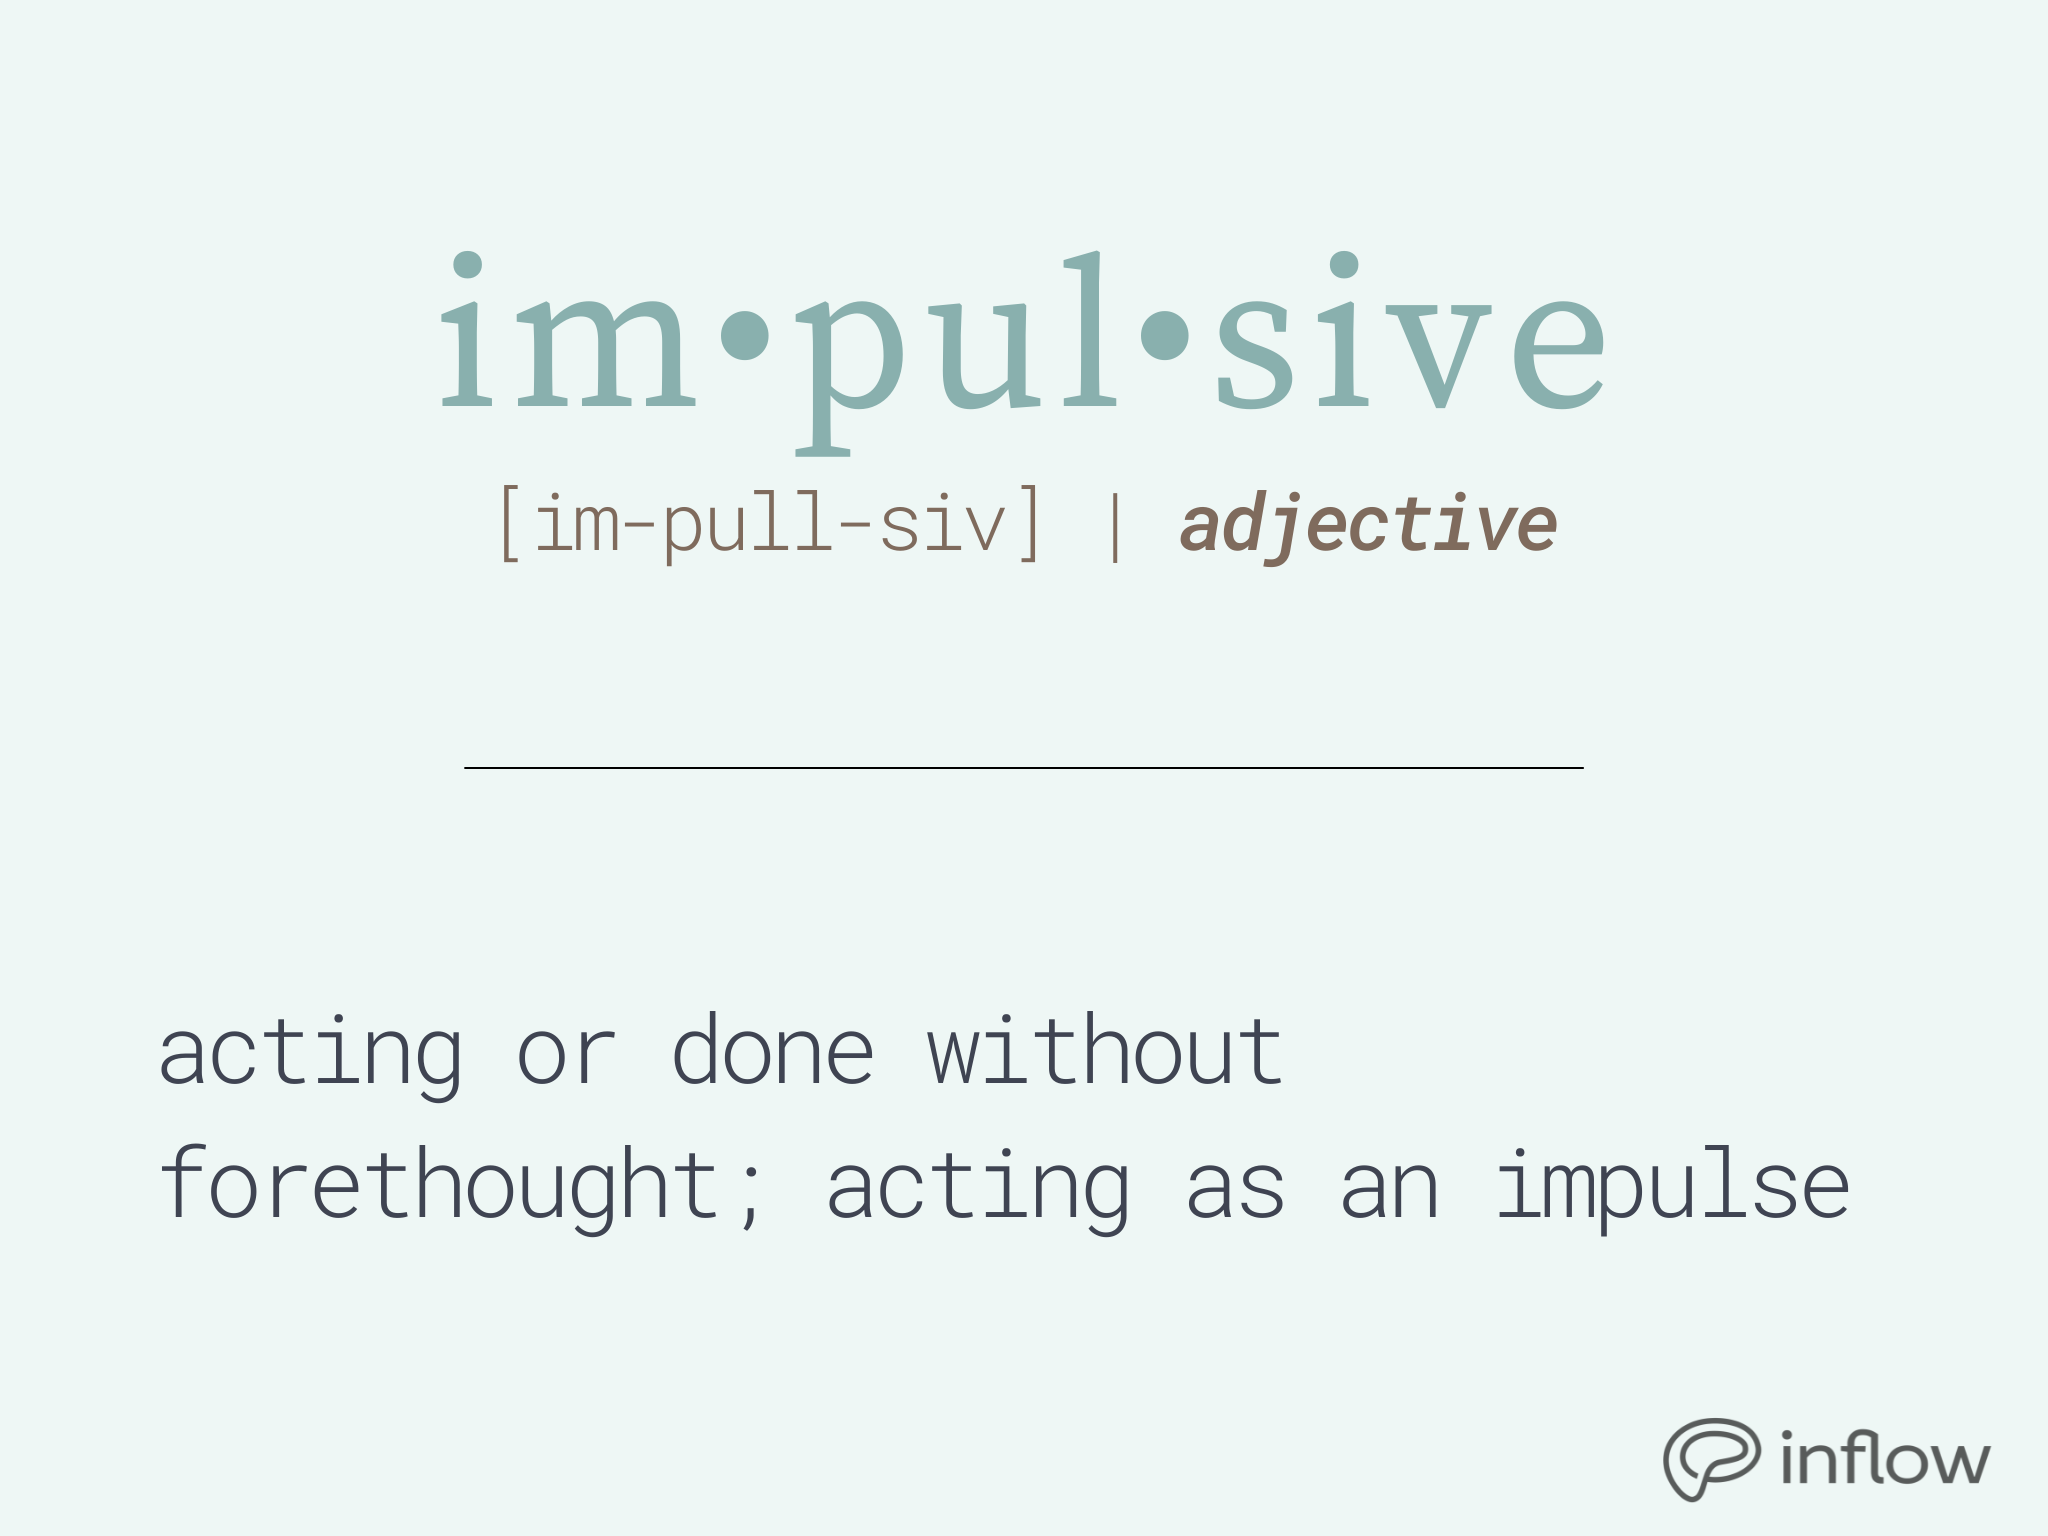 dictionary entry for "impulsive". adjective. definition: acting or done without forethought; acting as an impulse